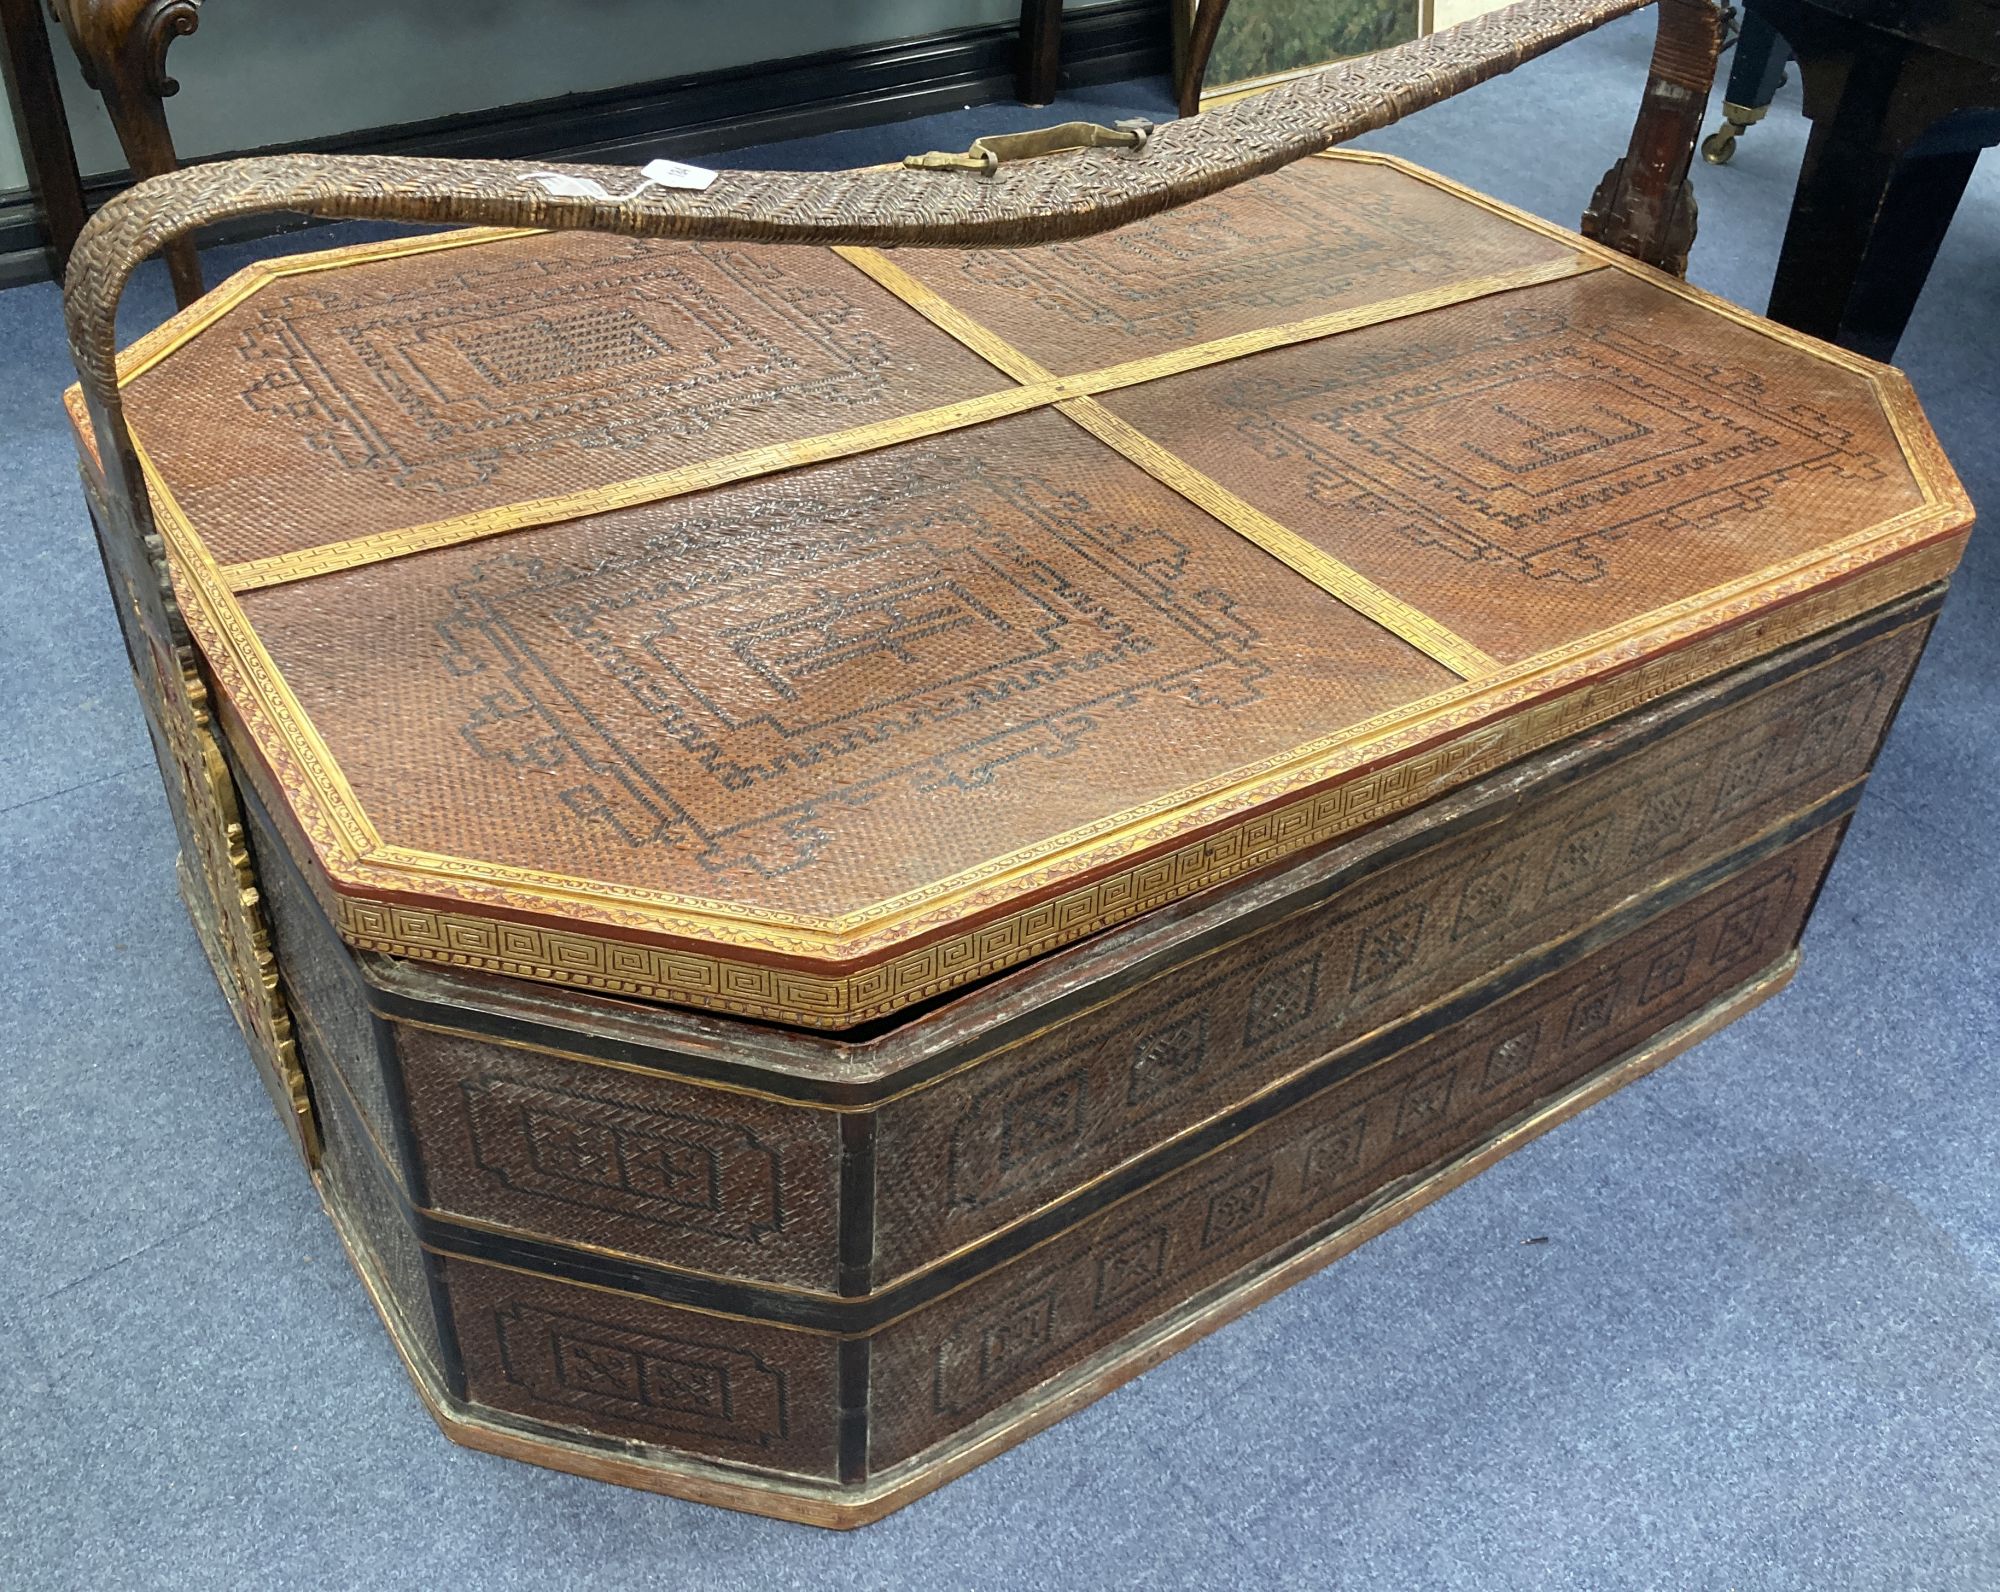 A large Chinese woven octagonal casket and cover, length 126cm, depth 92cm, height 64cm